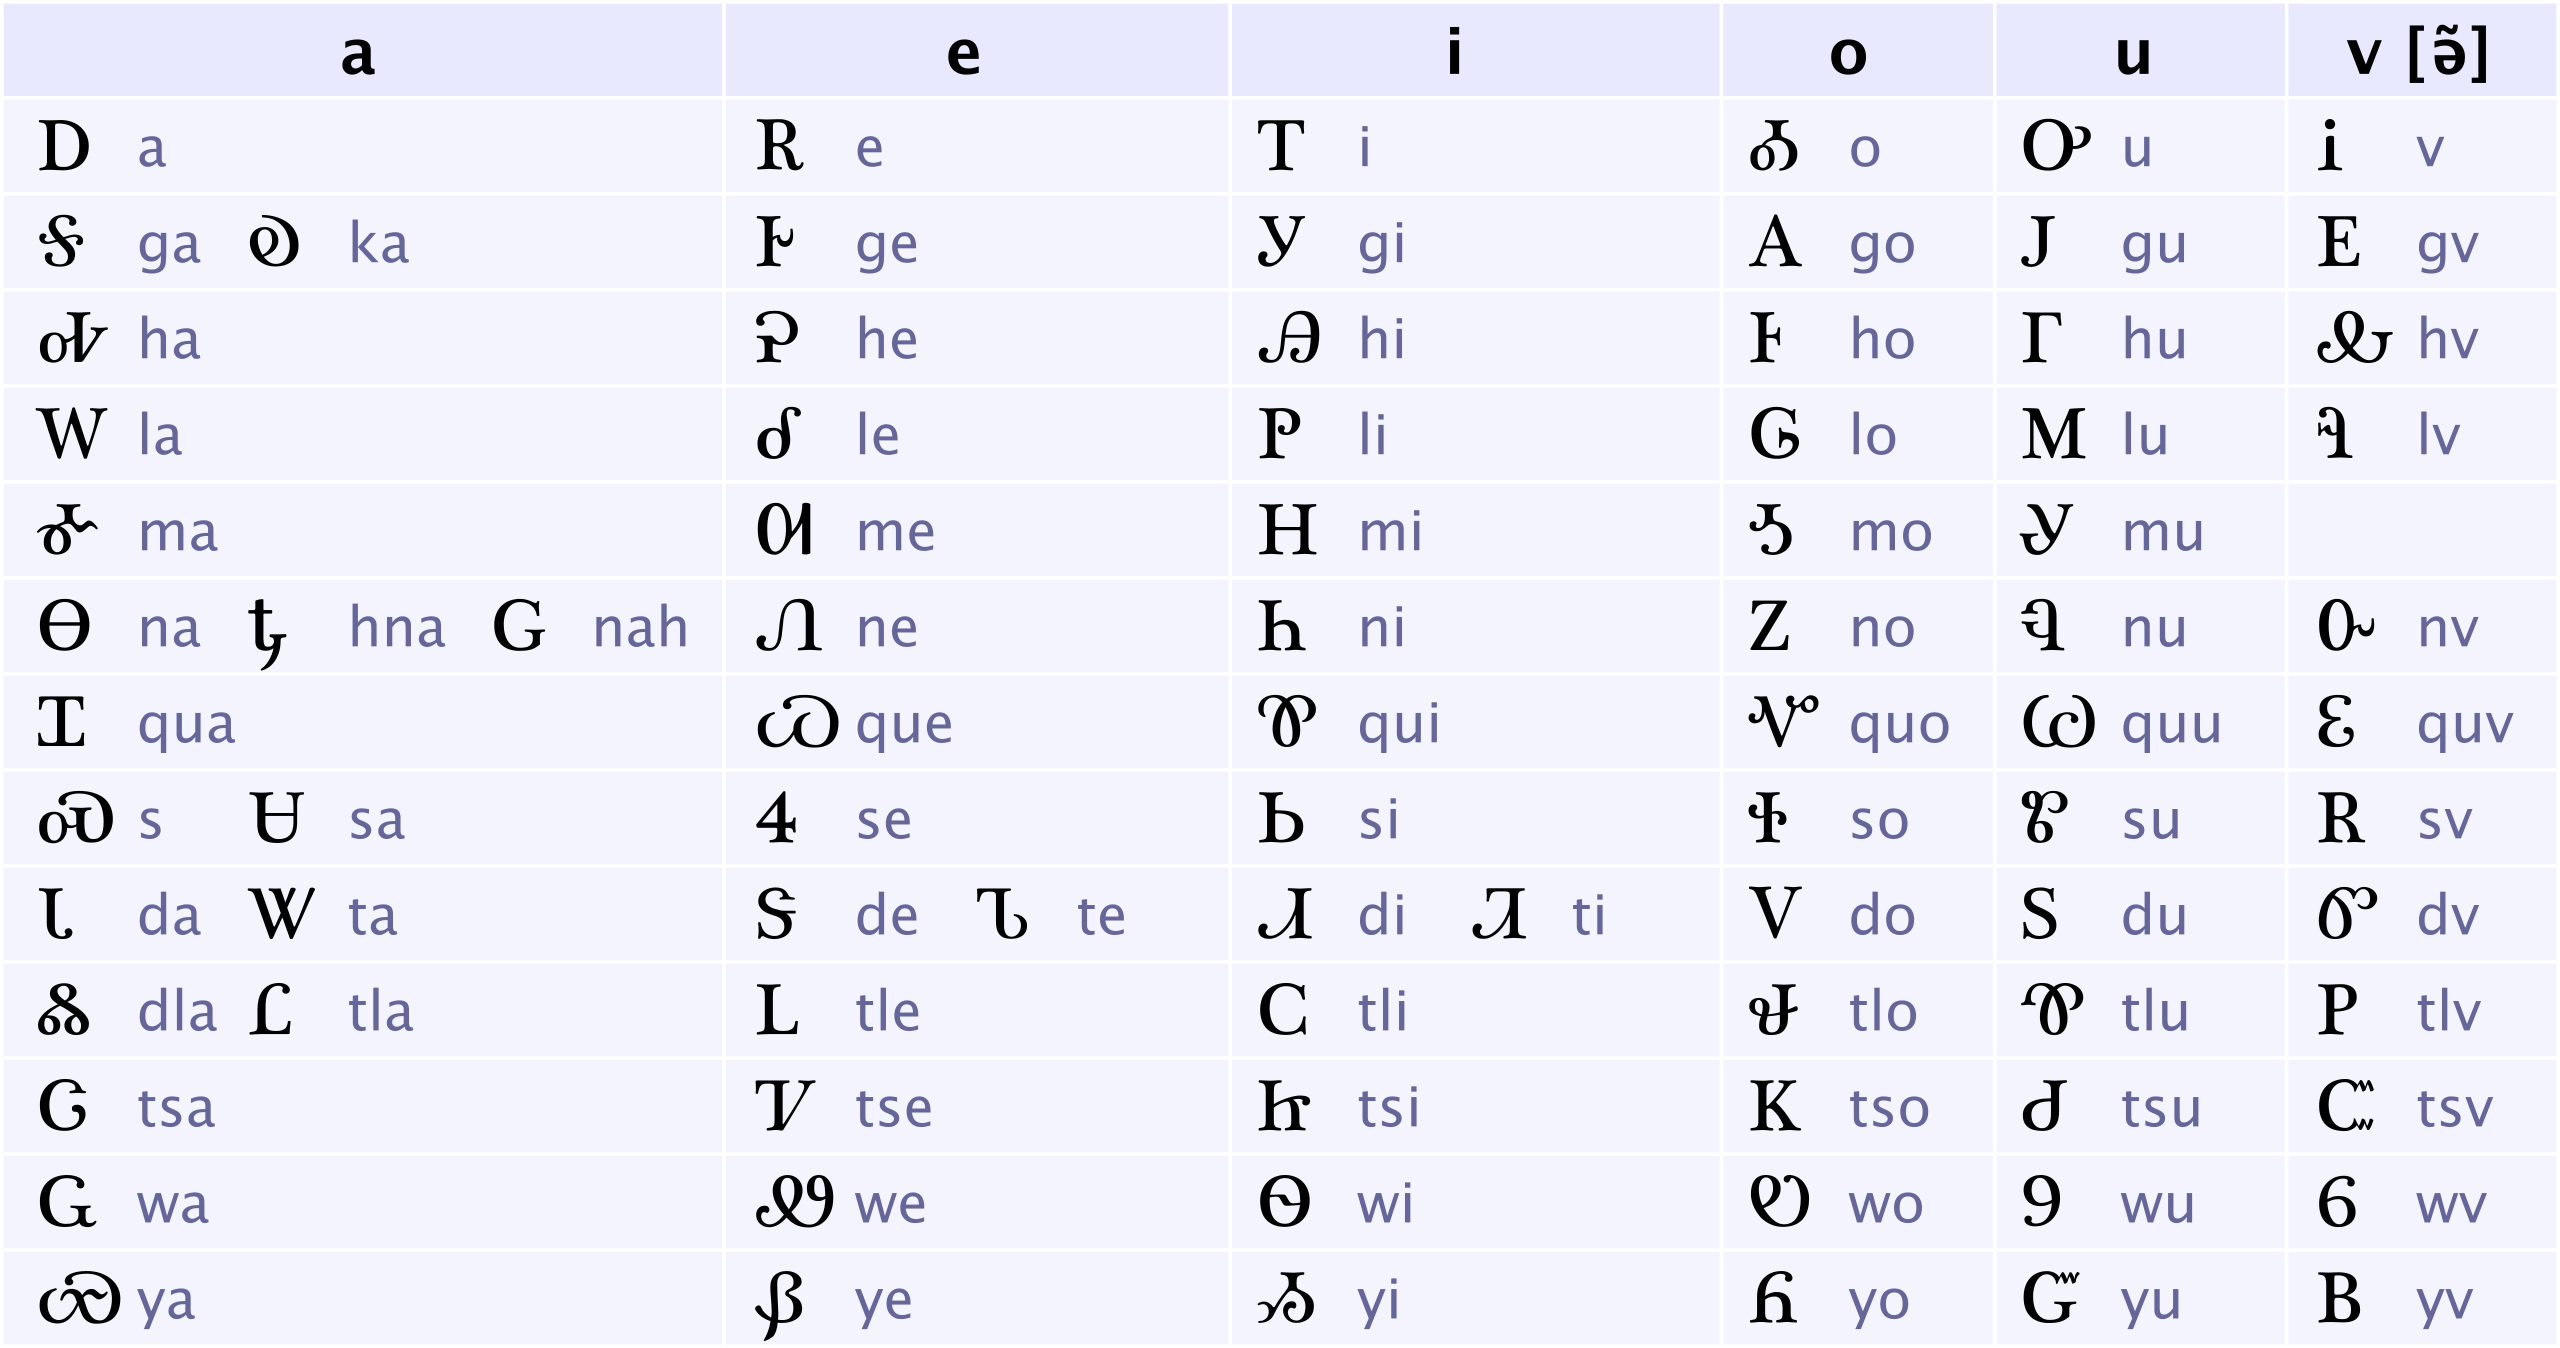 A table of the Cherokee Syllabary, in which each symbol represents a different phoneme from the Cherokee language and is shown with the corresponding English phonetic, and organized according to vowel sounds.